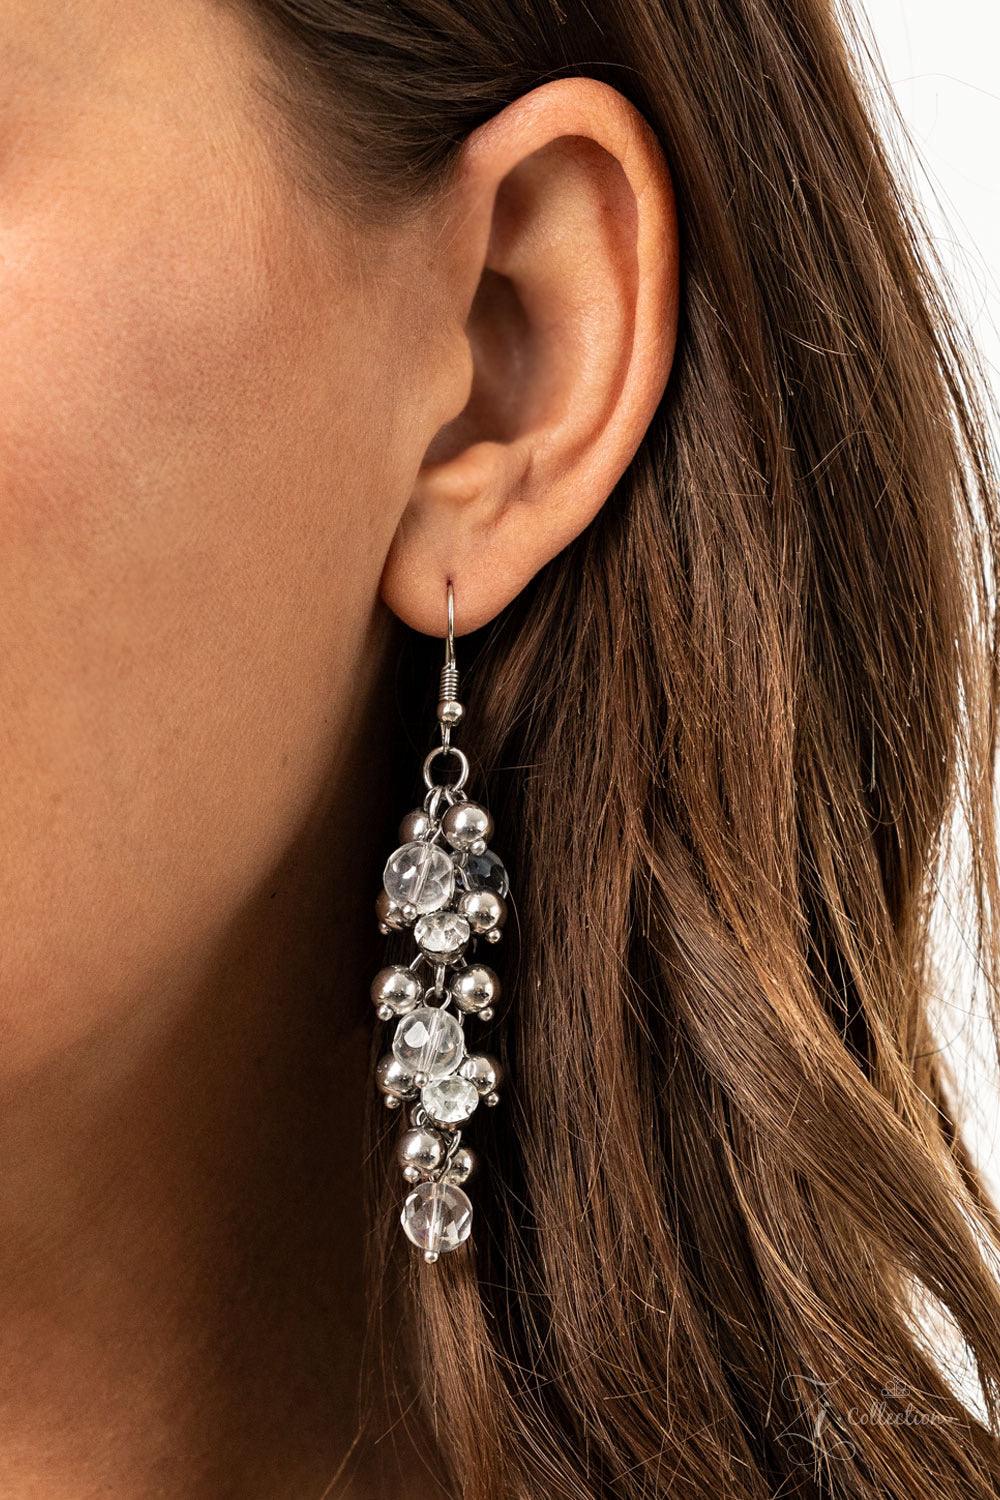 Paparazzi Accessories Sociable 💗💗ZiCollection $25💗💗 A seemingly infinite collection of bubbly silver beads, glittery white rhinestones, and glassy iridescent beads swings from an interconnected net of silver links. The flirtatious fringe effervescentl